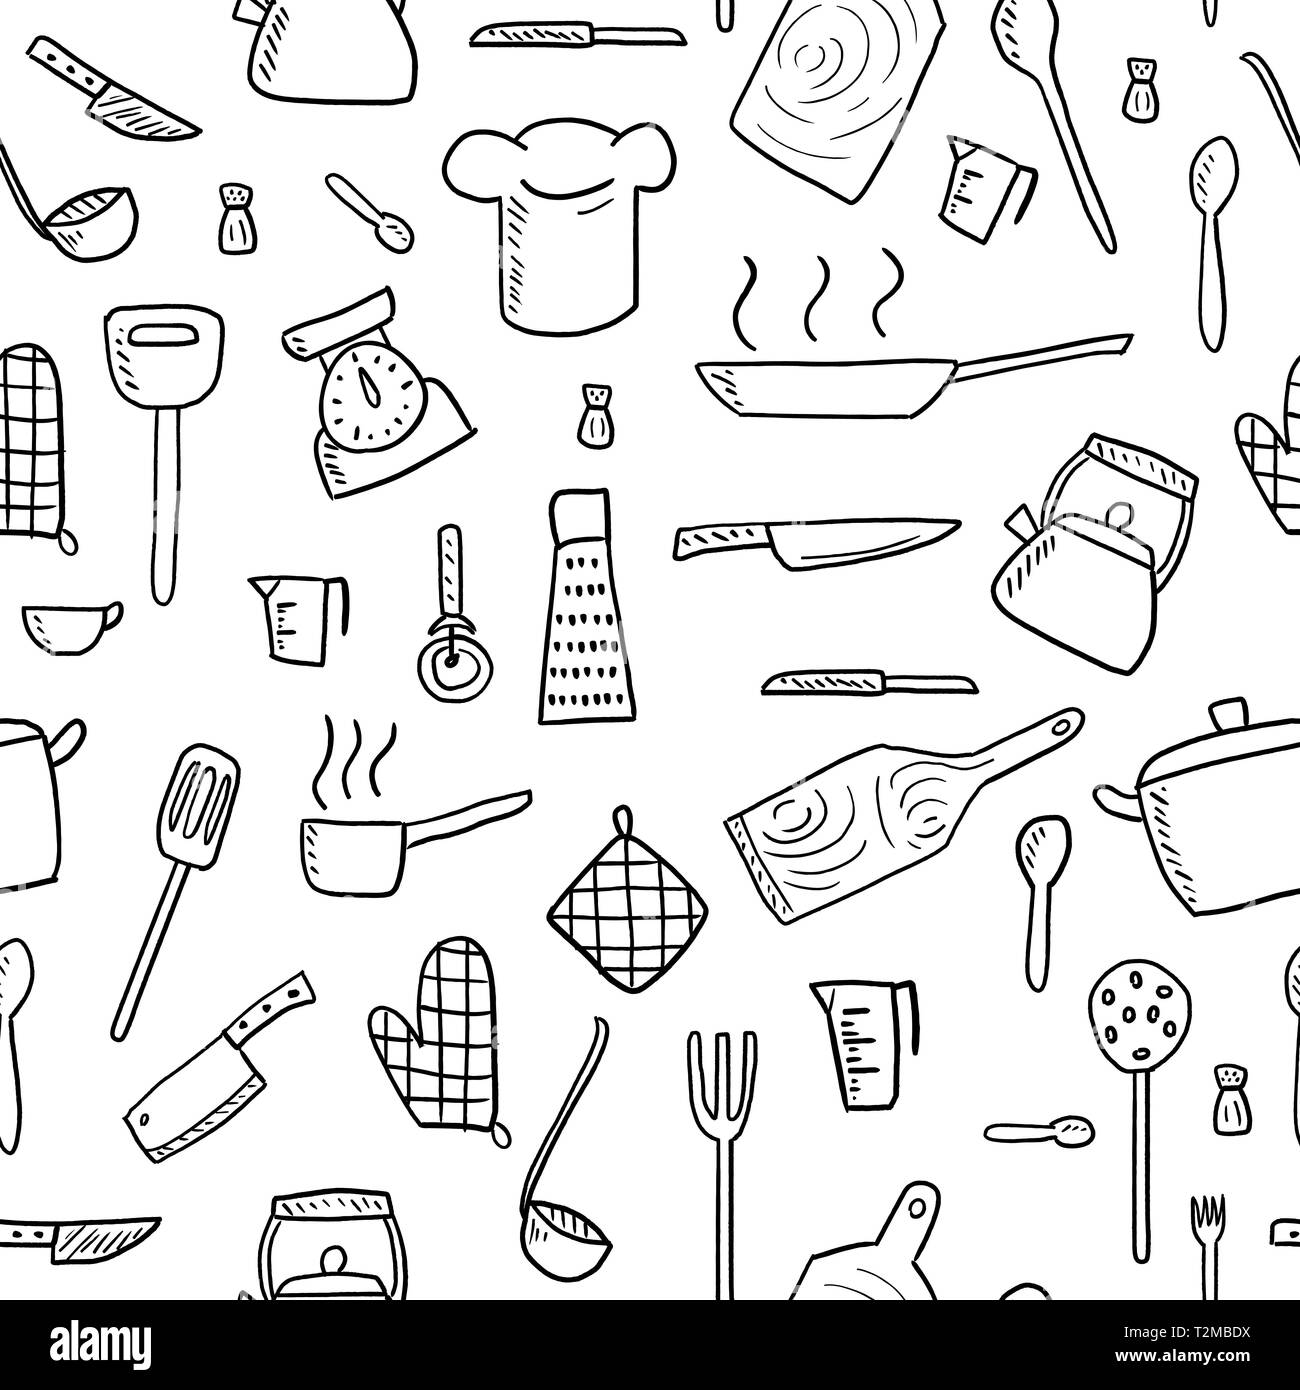 Set with kitchen utensil and appliance. Scandinavian illustration of kitchen  elements in flat style. Funny cartoon texture with hand drawn food  preparation and kitchenware. Vector doodle clipart. Stock Vector by ©Monash  412159158